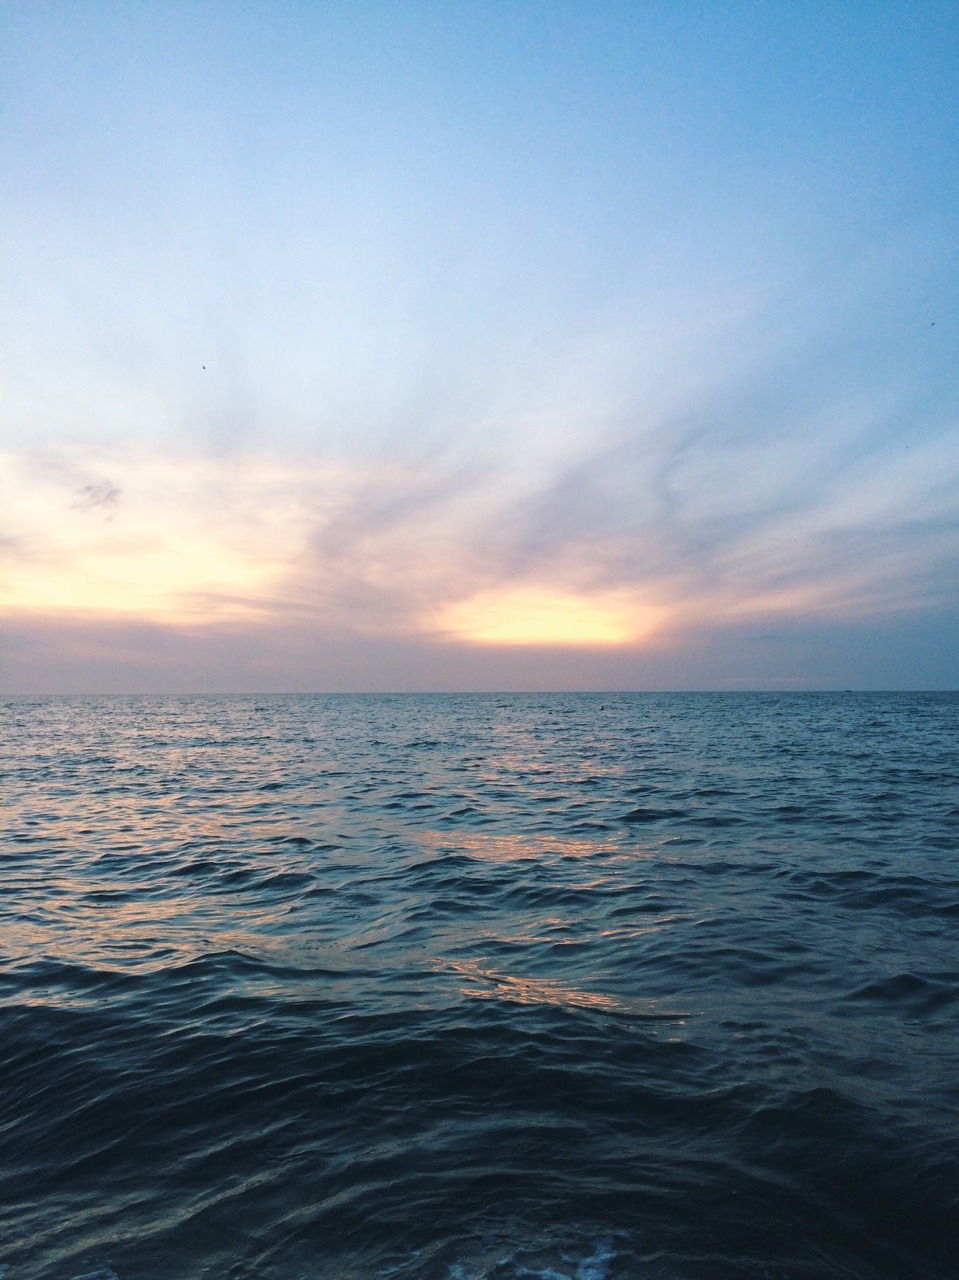 collectingsunlightforyou:  the light was dancing on the sea tonight.   I SEE THE